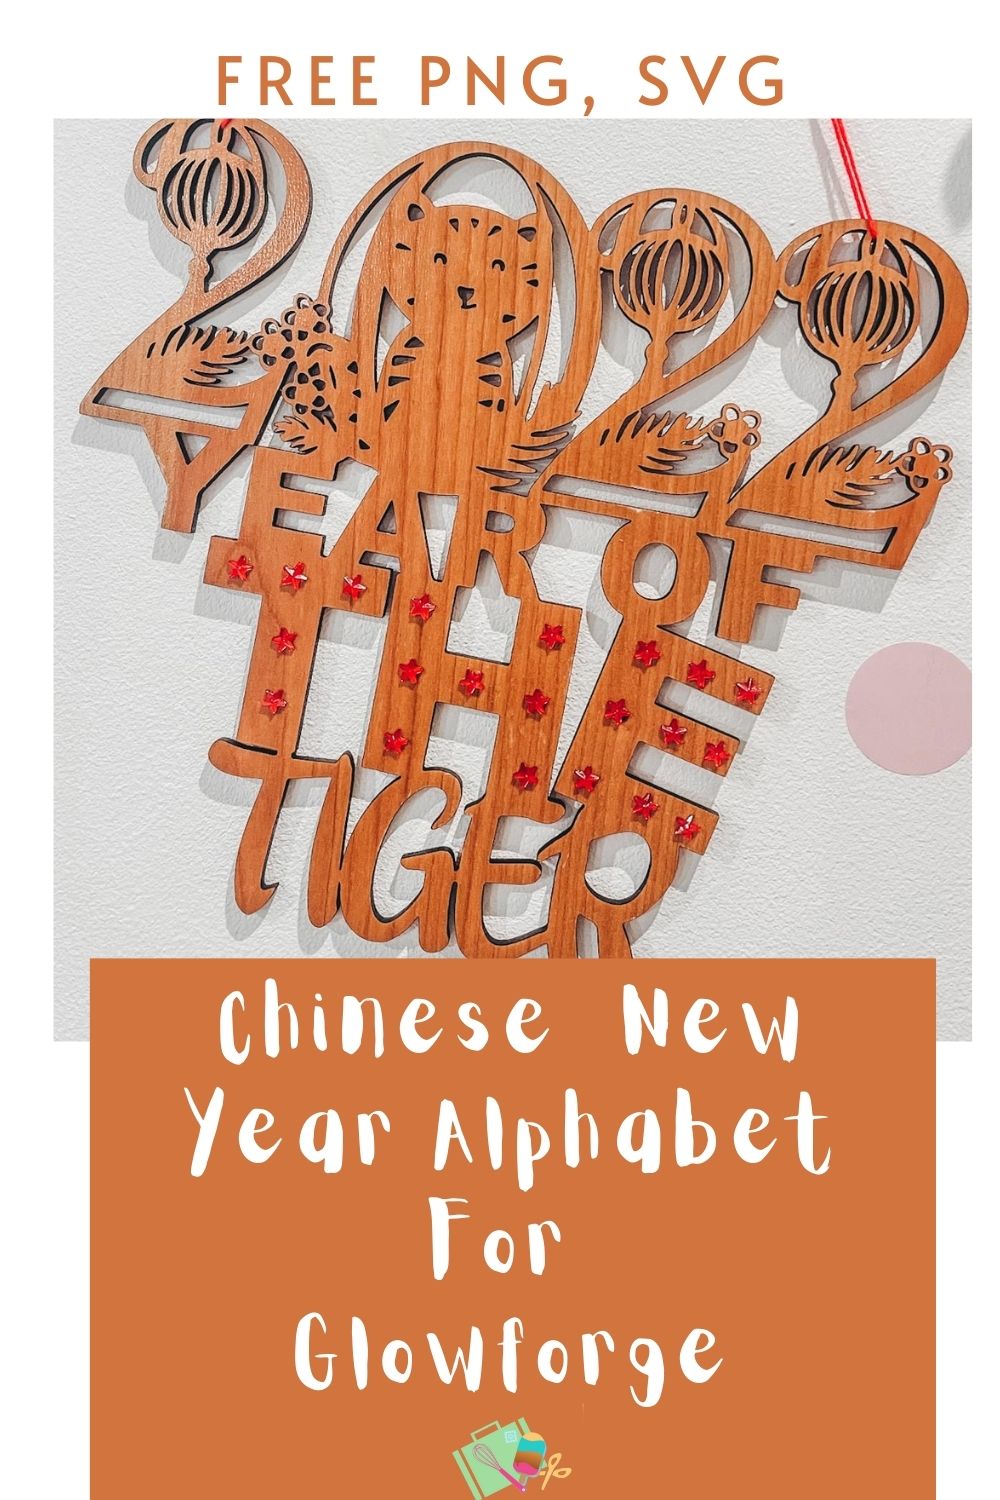 Chinese New Year Alphabet and Number SVG Files For Glowforge